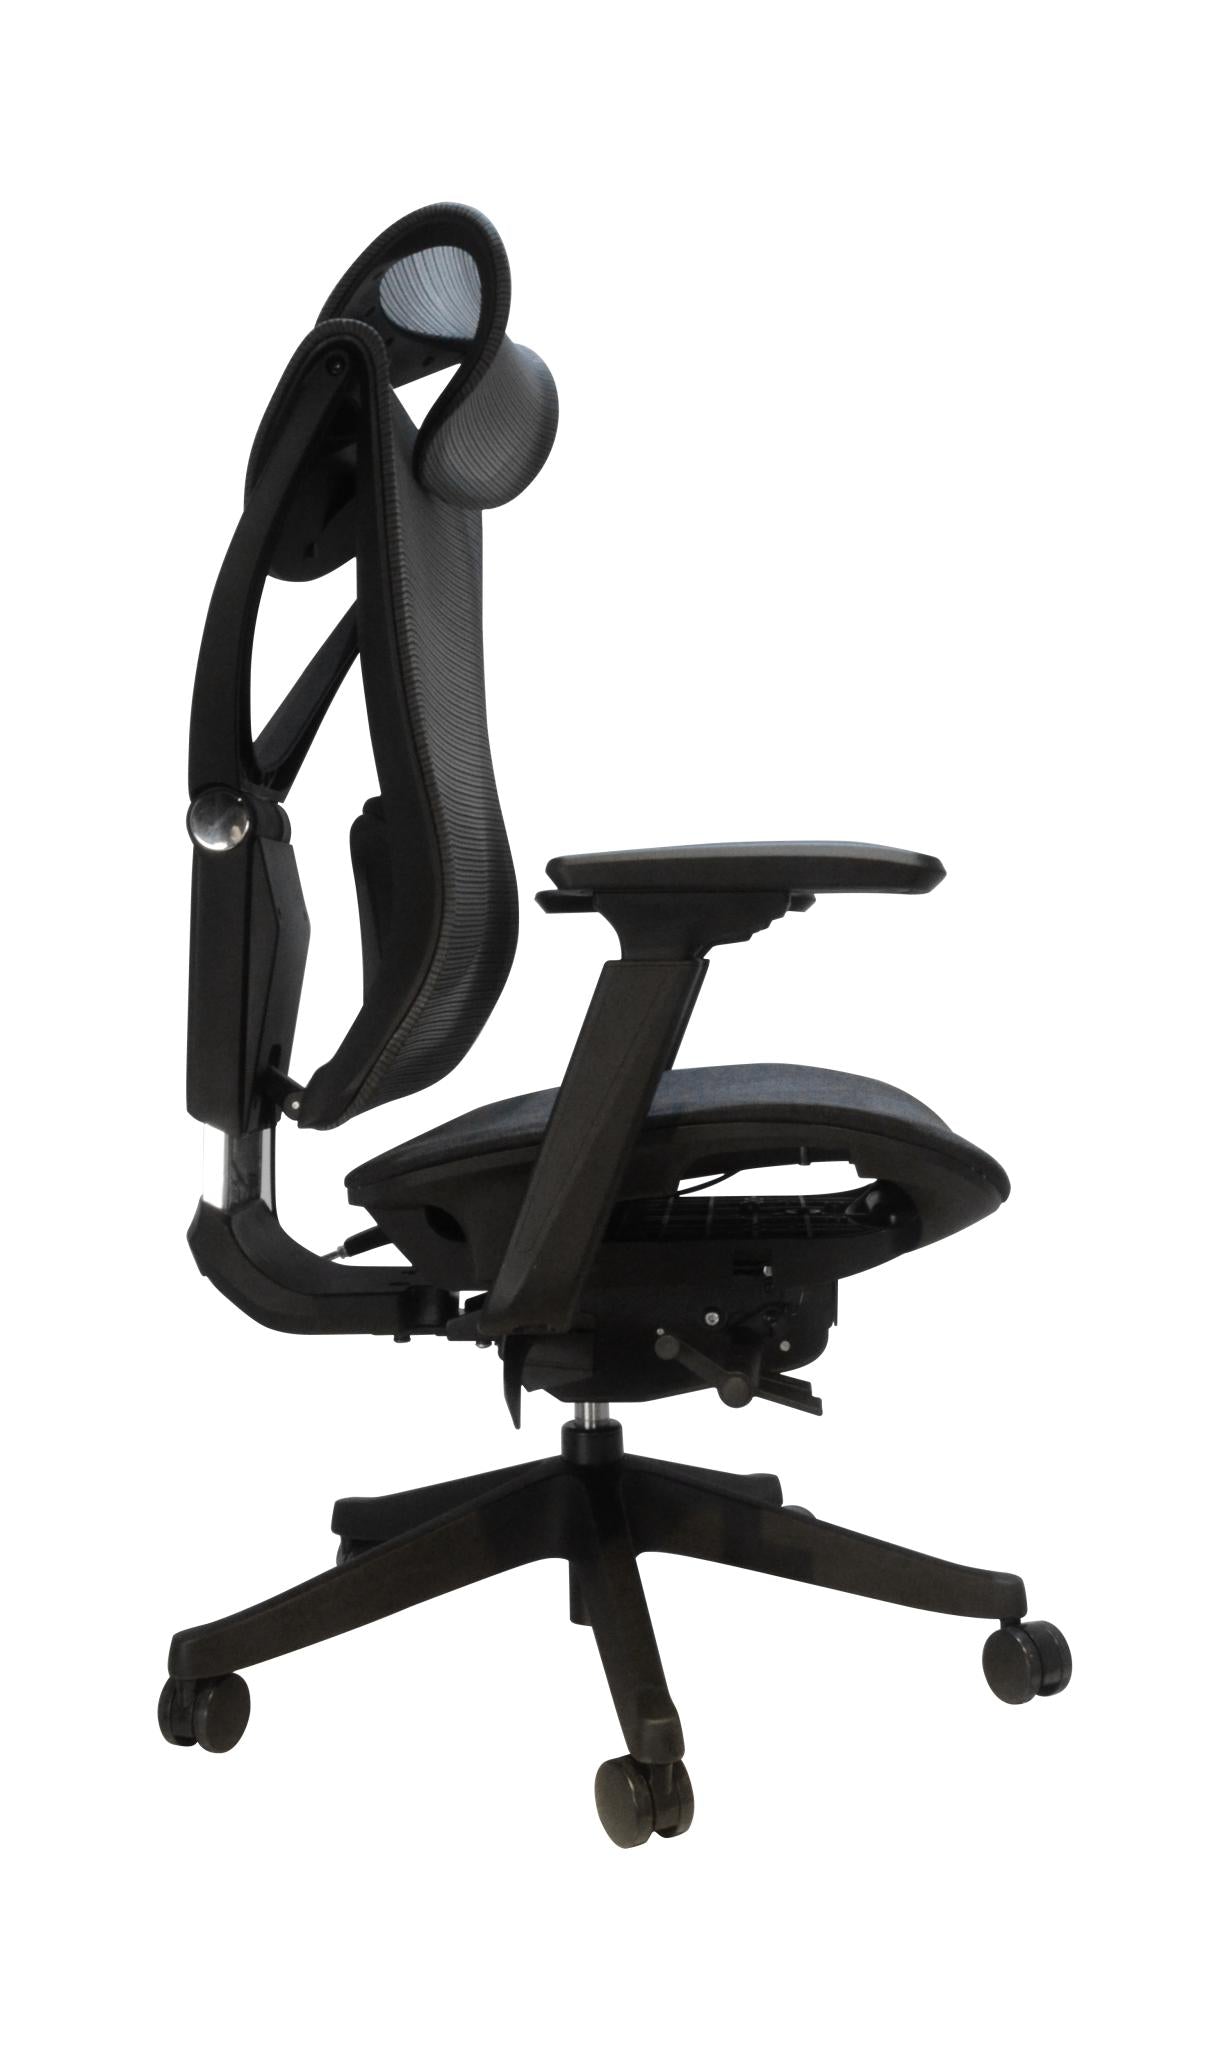 Tall Office Chair with Adjustable Features, 300lbs Capacity, Black